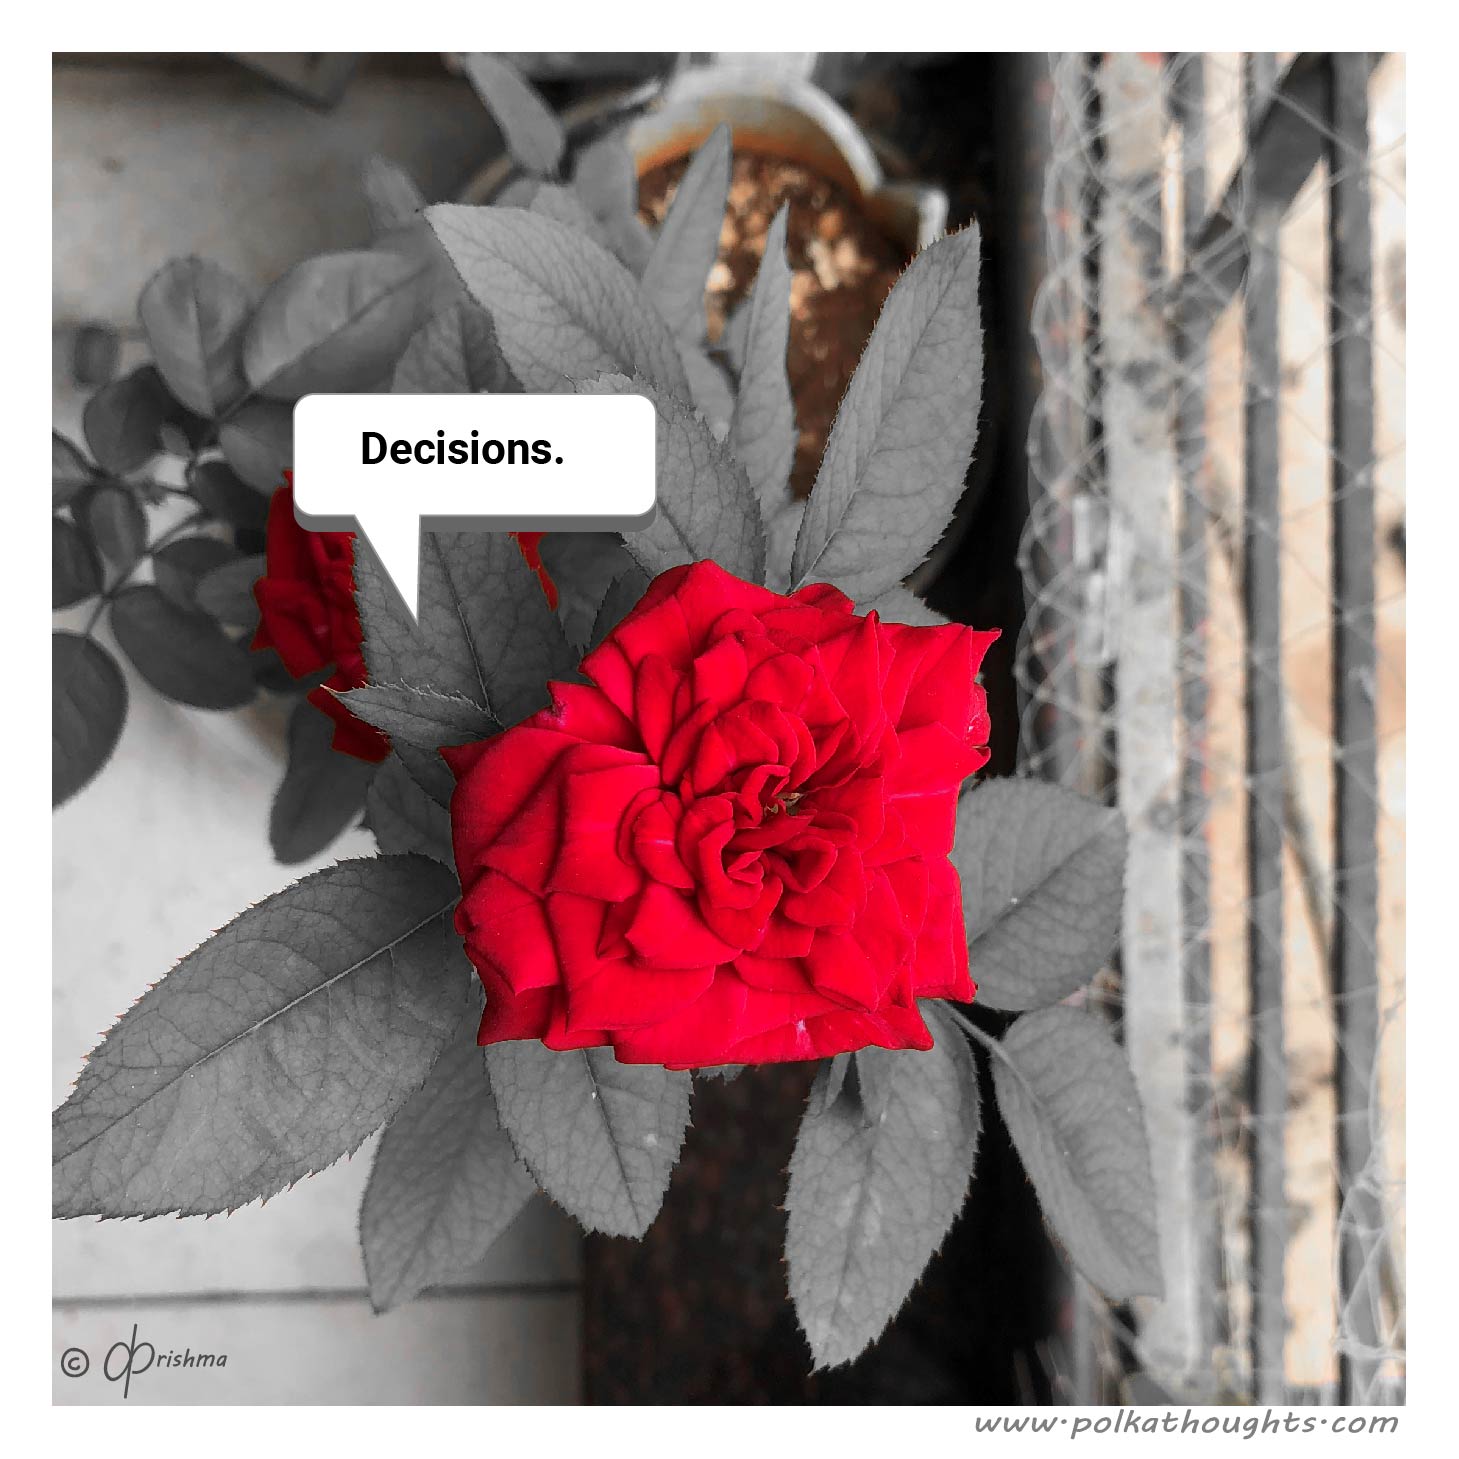 A full-bloom red rose